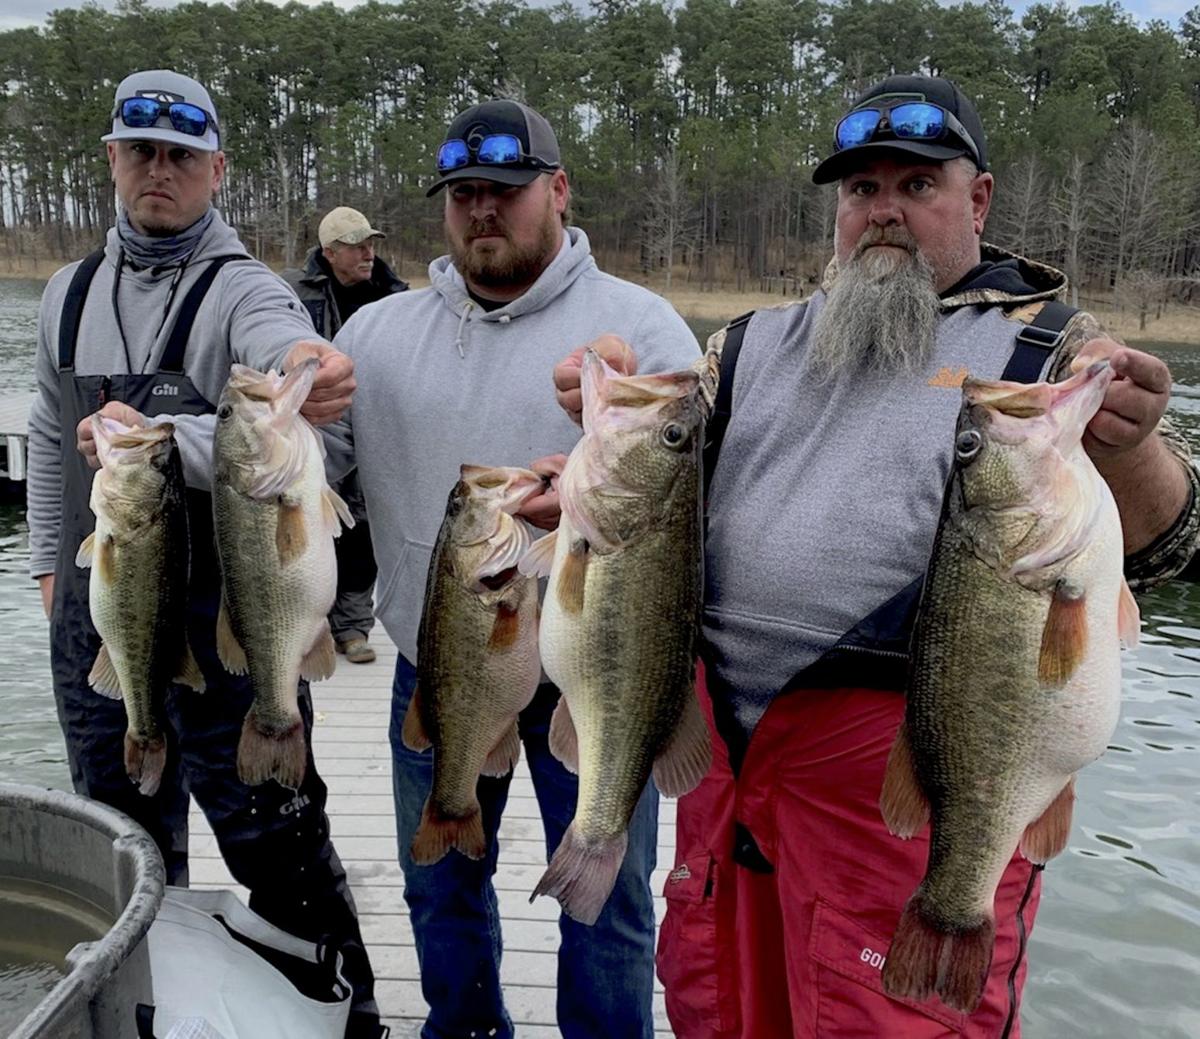 Texas angler's 40-6 catch ranks among tournament lore's biggest bags, Sports